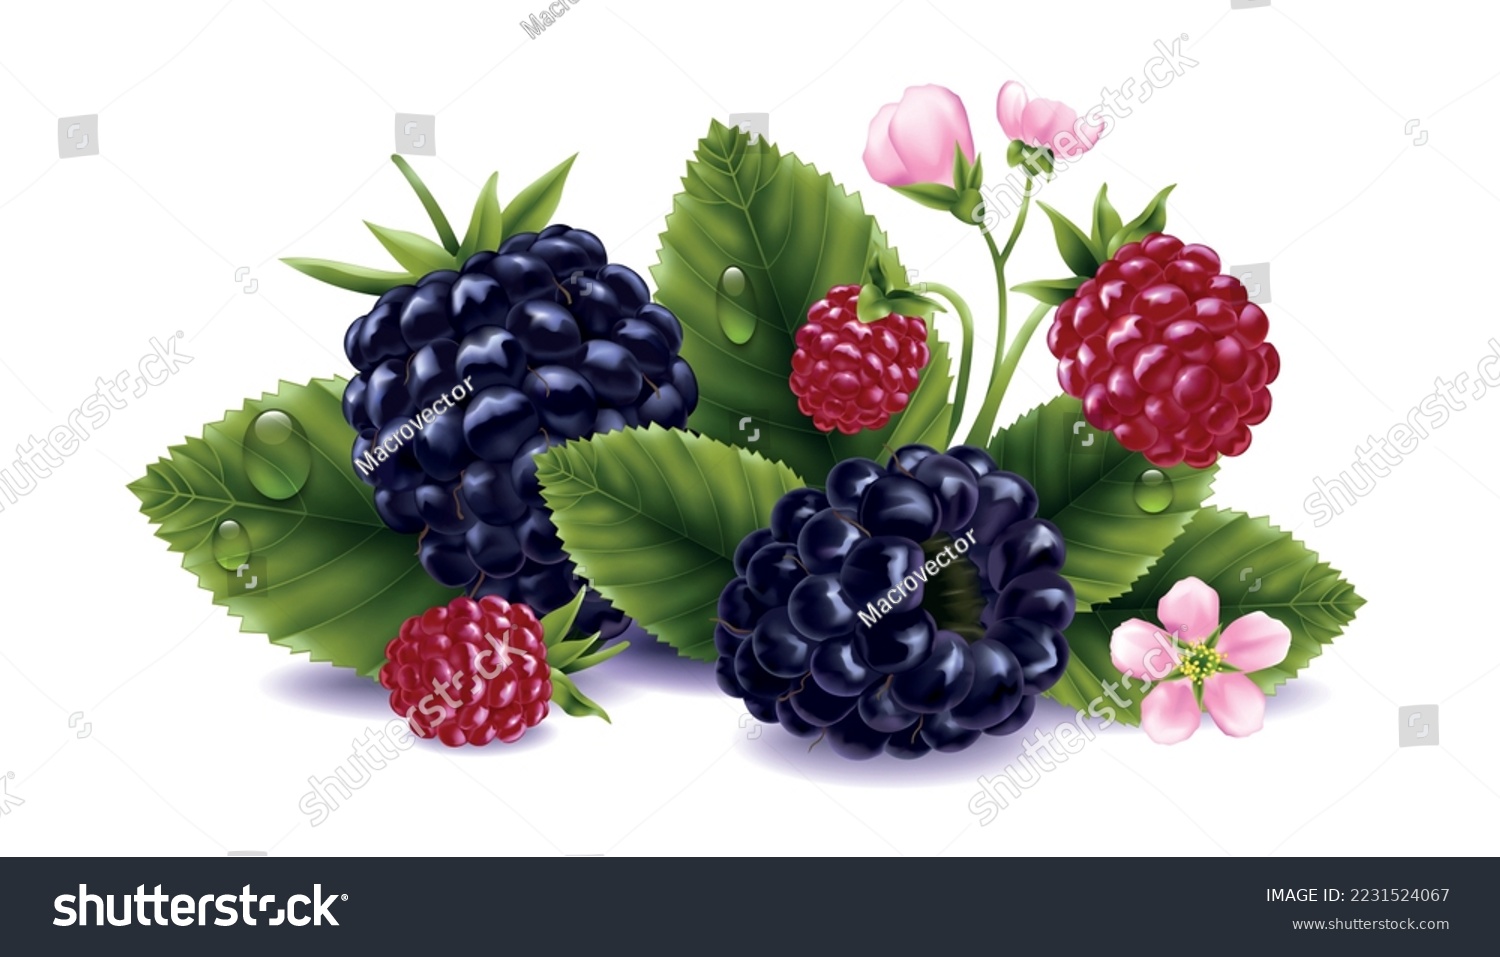 Blackberry realistic composition with ripe and underripe berries flowers and leaves vector illustration #2231524067